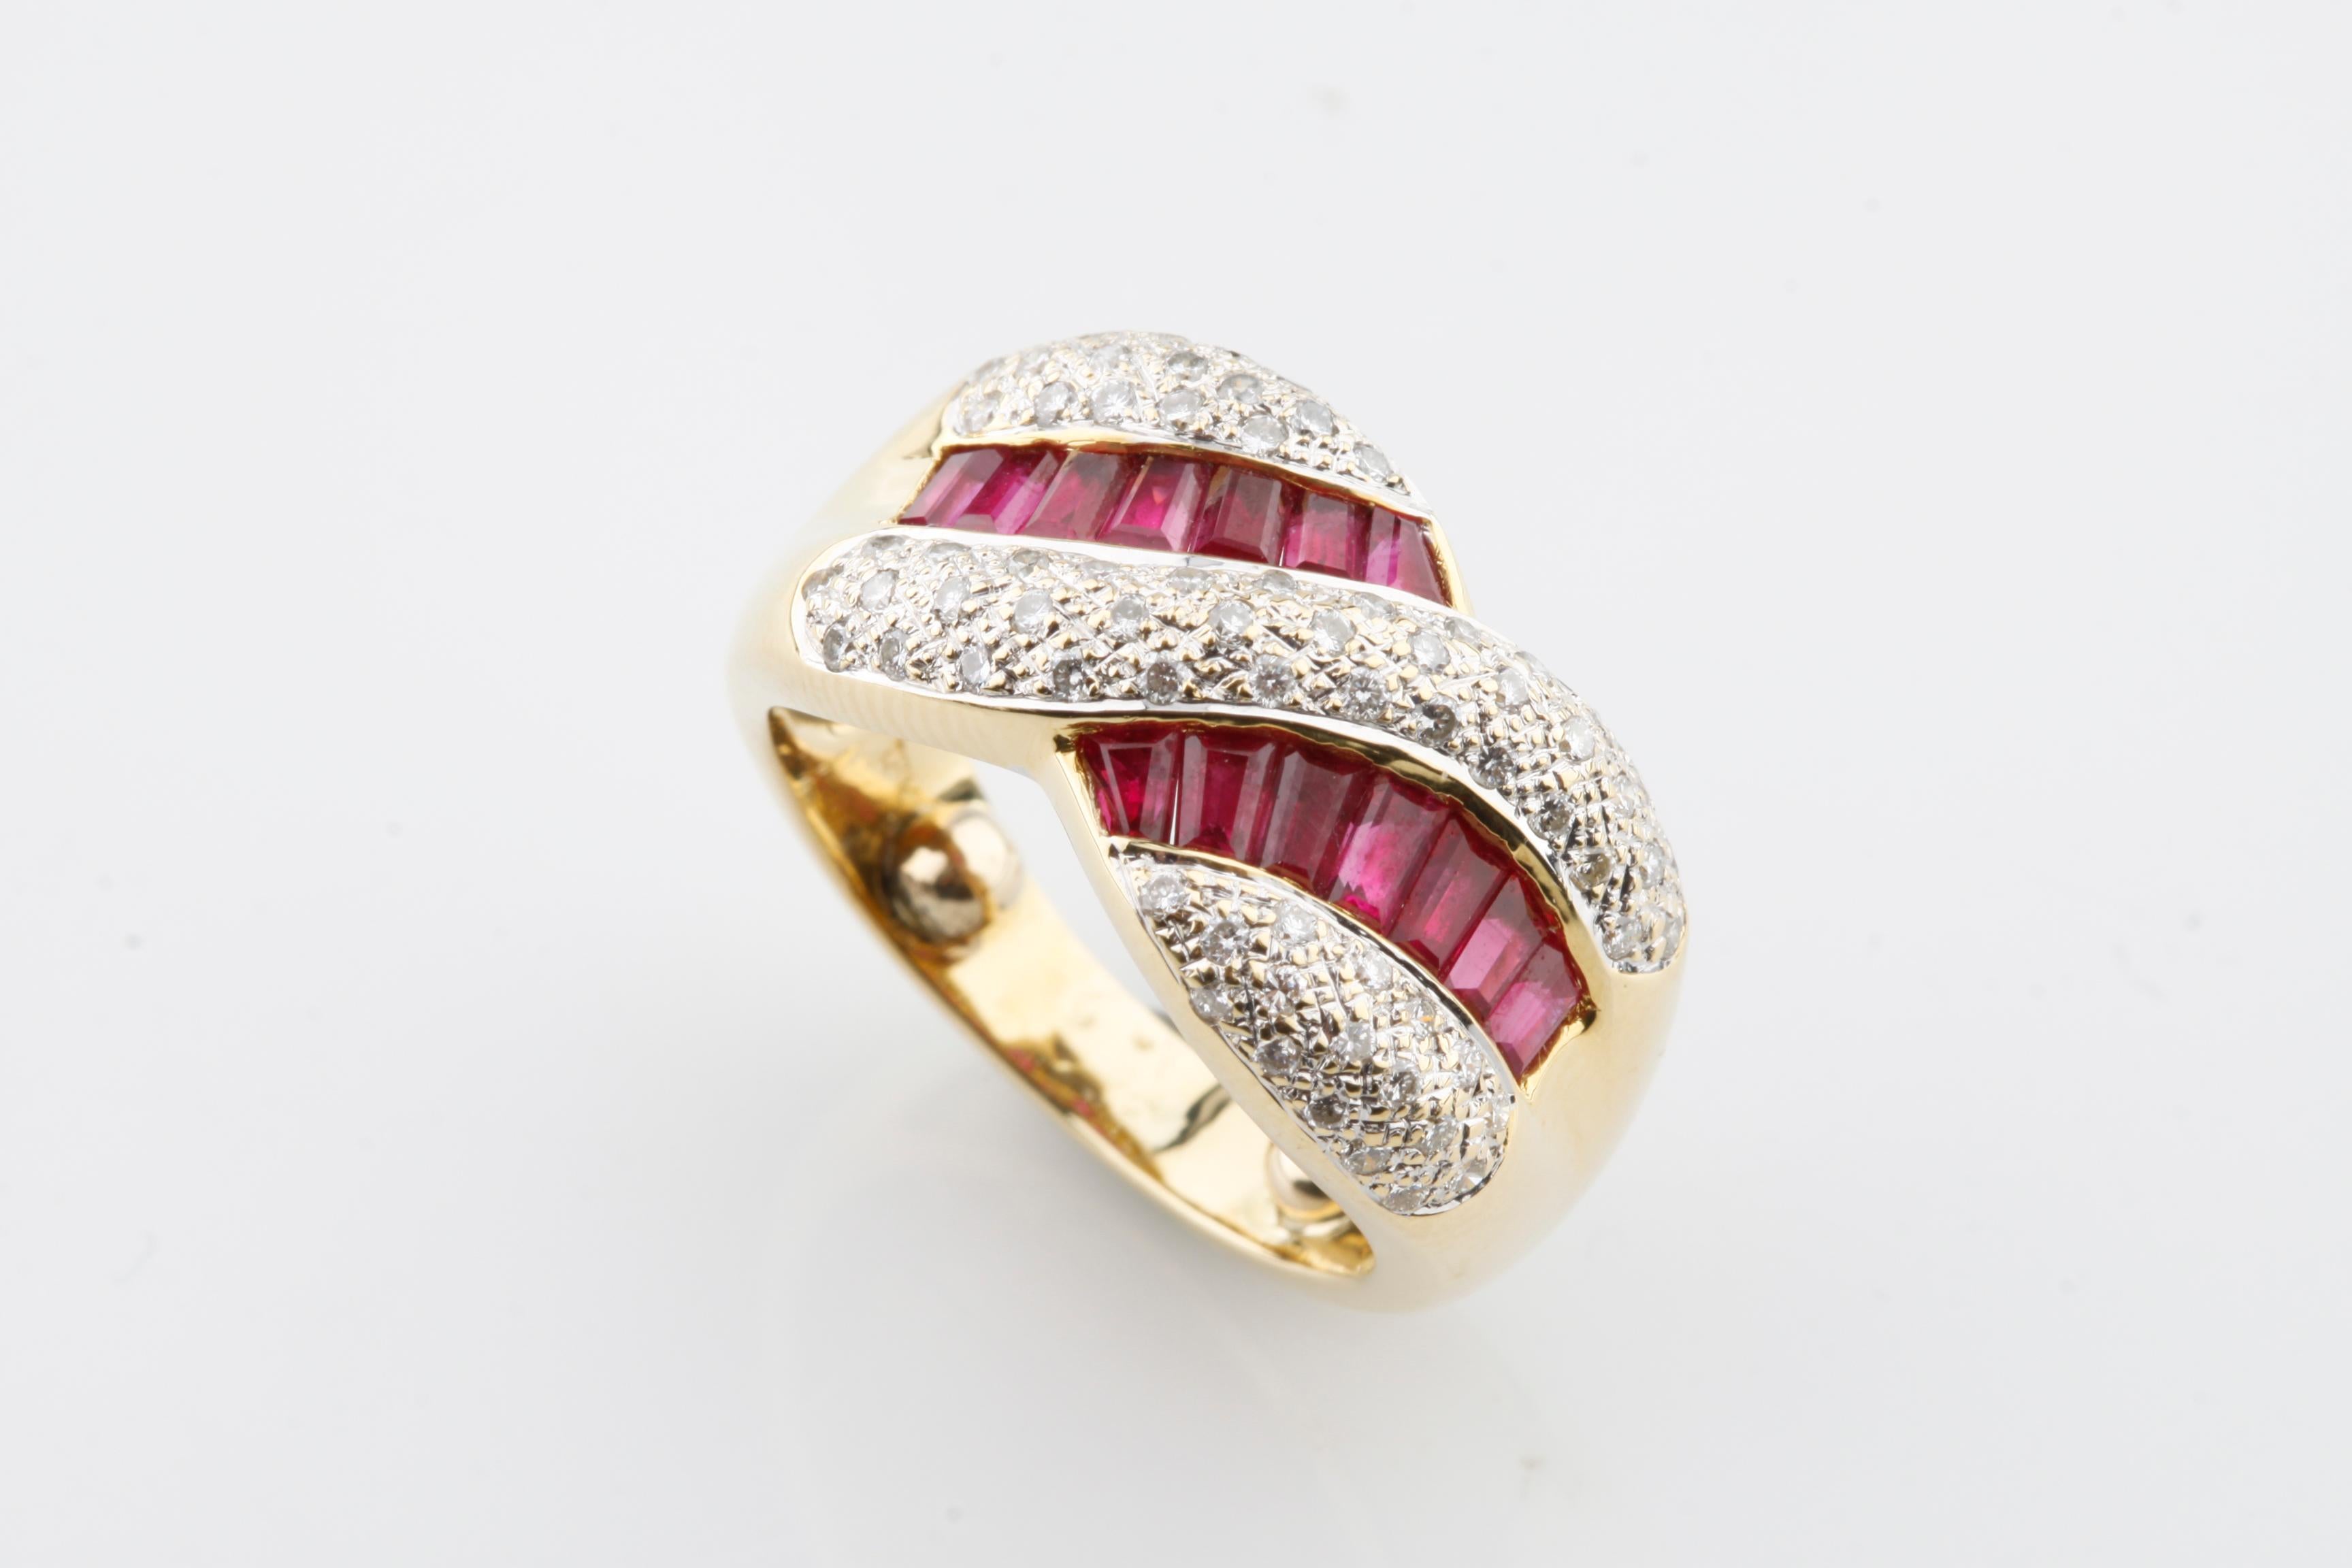 Fourteen Channel Set Baguette Cut Natural Ruby
Measuring 3.50 x 2.00 x 1.30 mm
Approximate Total Weight Of= 1.40 Carats. 
Clarity Is Slightly Included, Type II
Medium Dark, Moderately Strong, Slightly Purplish Red Color, (GIA slpR 6/4)
Cut Is